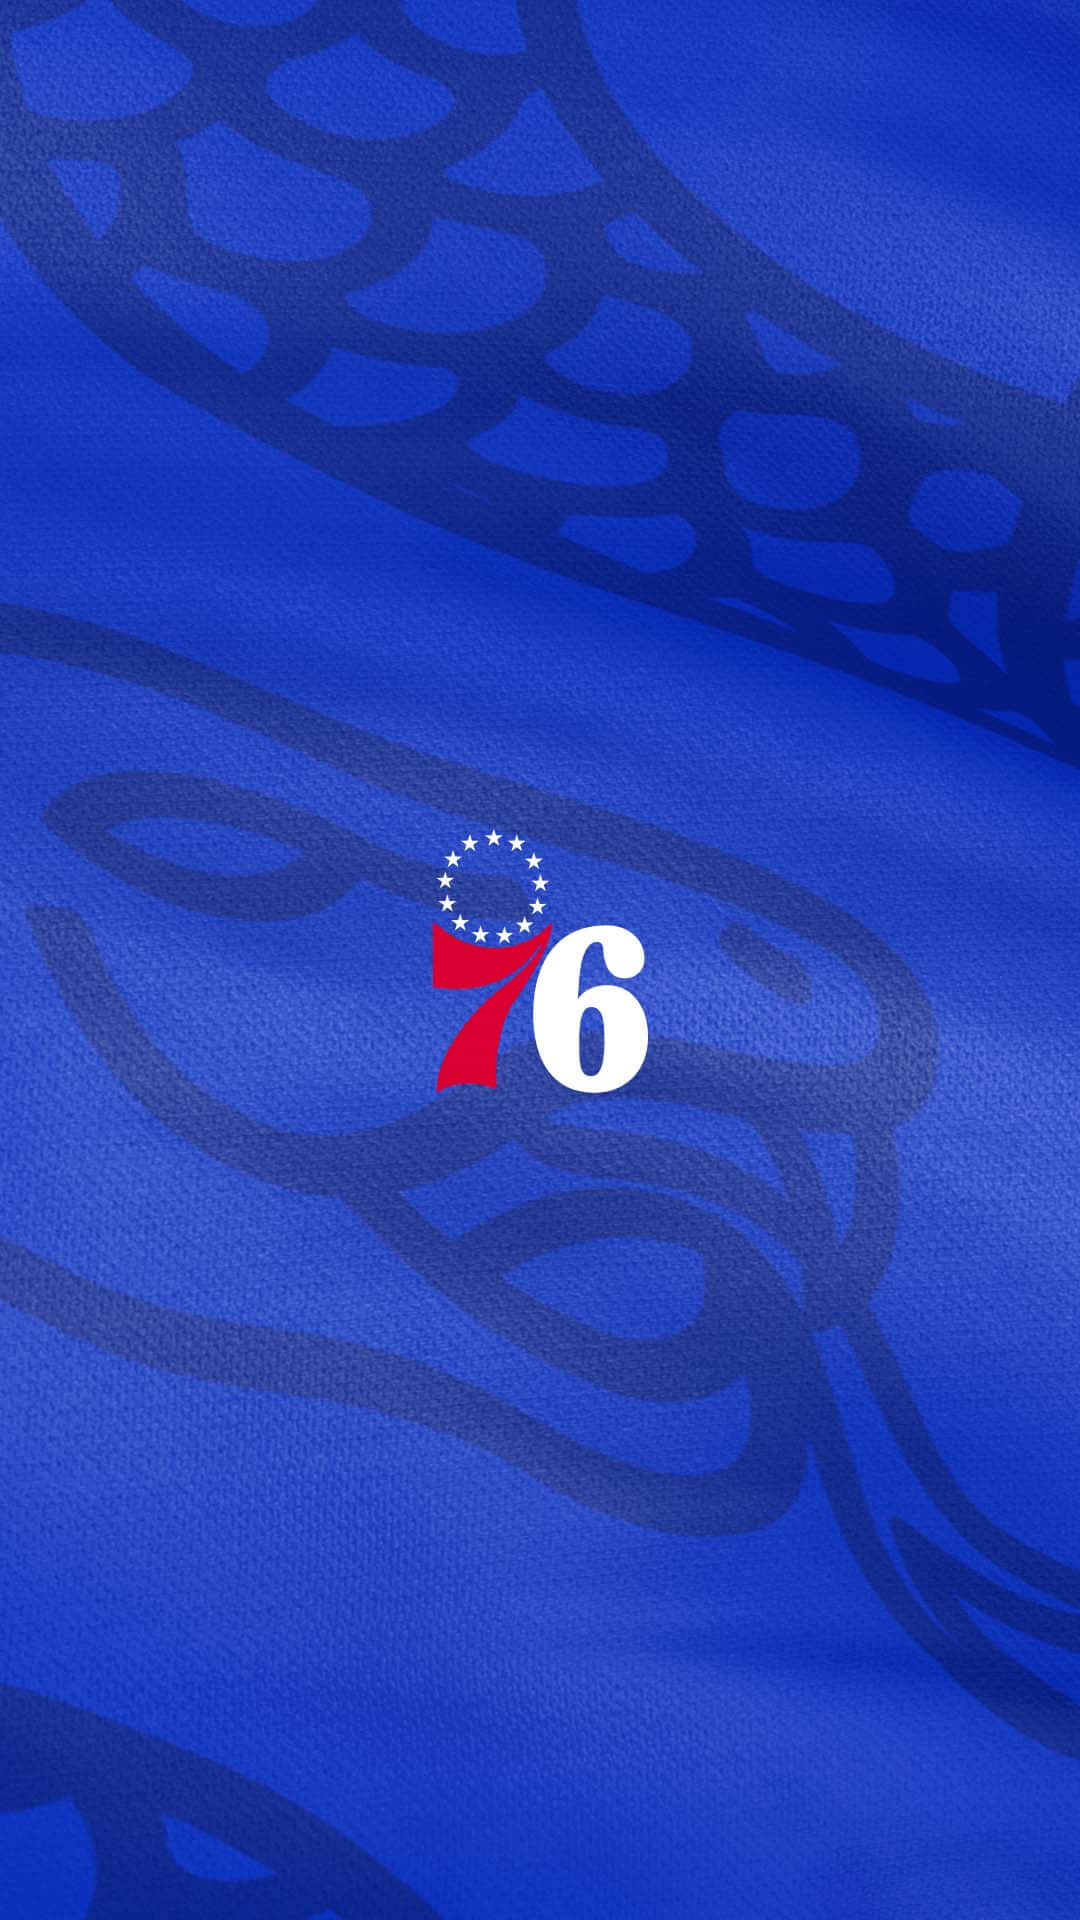 "A Philadelphia 76ers Fan's Dream - Get Your Own Sixers Iphone Today!" Wallpaper